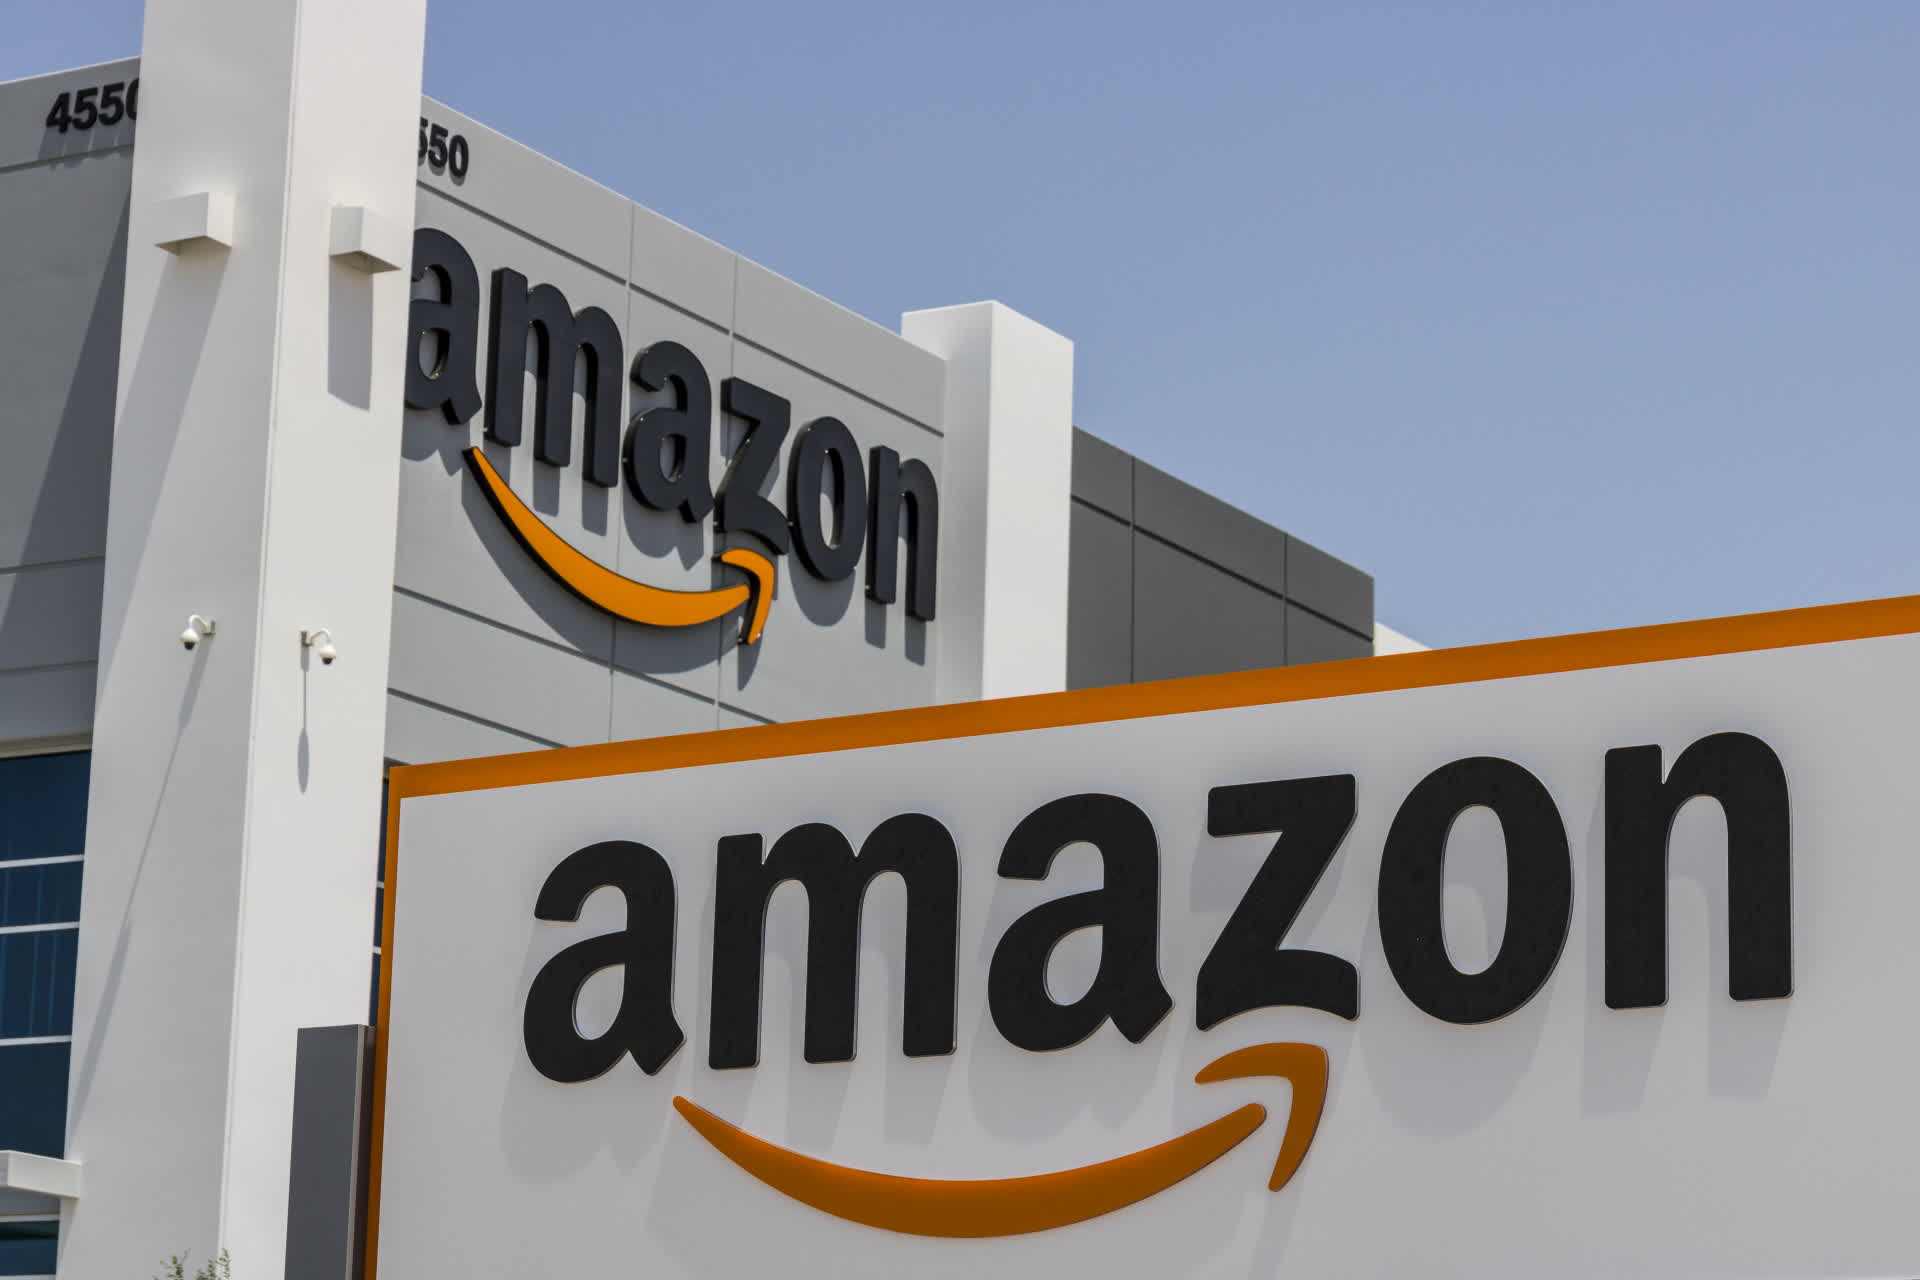 Bitcoin nears $40K after Amazon job ad suggests company will start accepting crypto